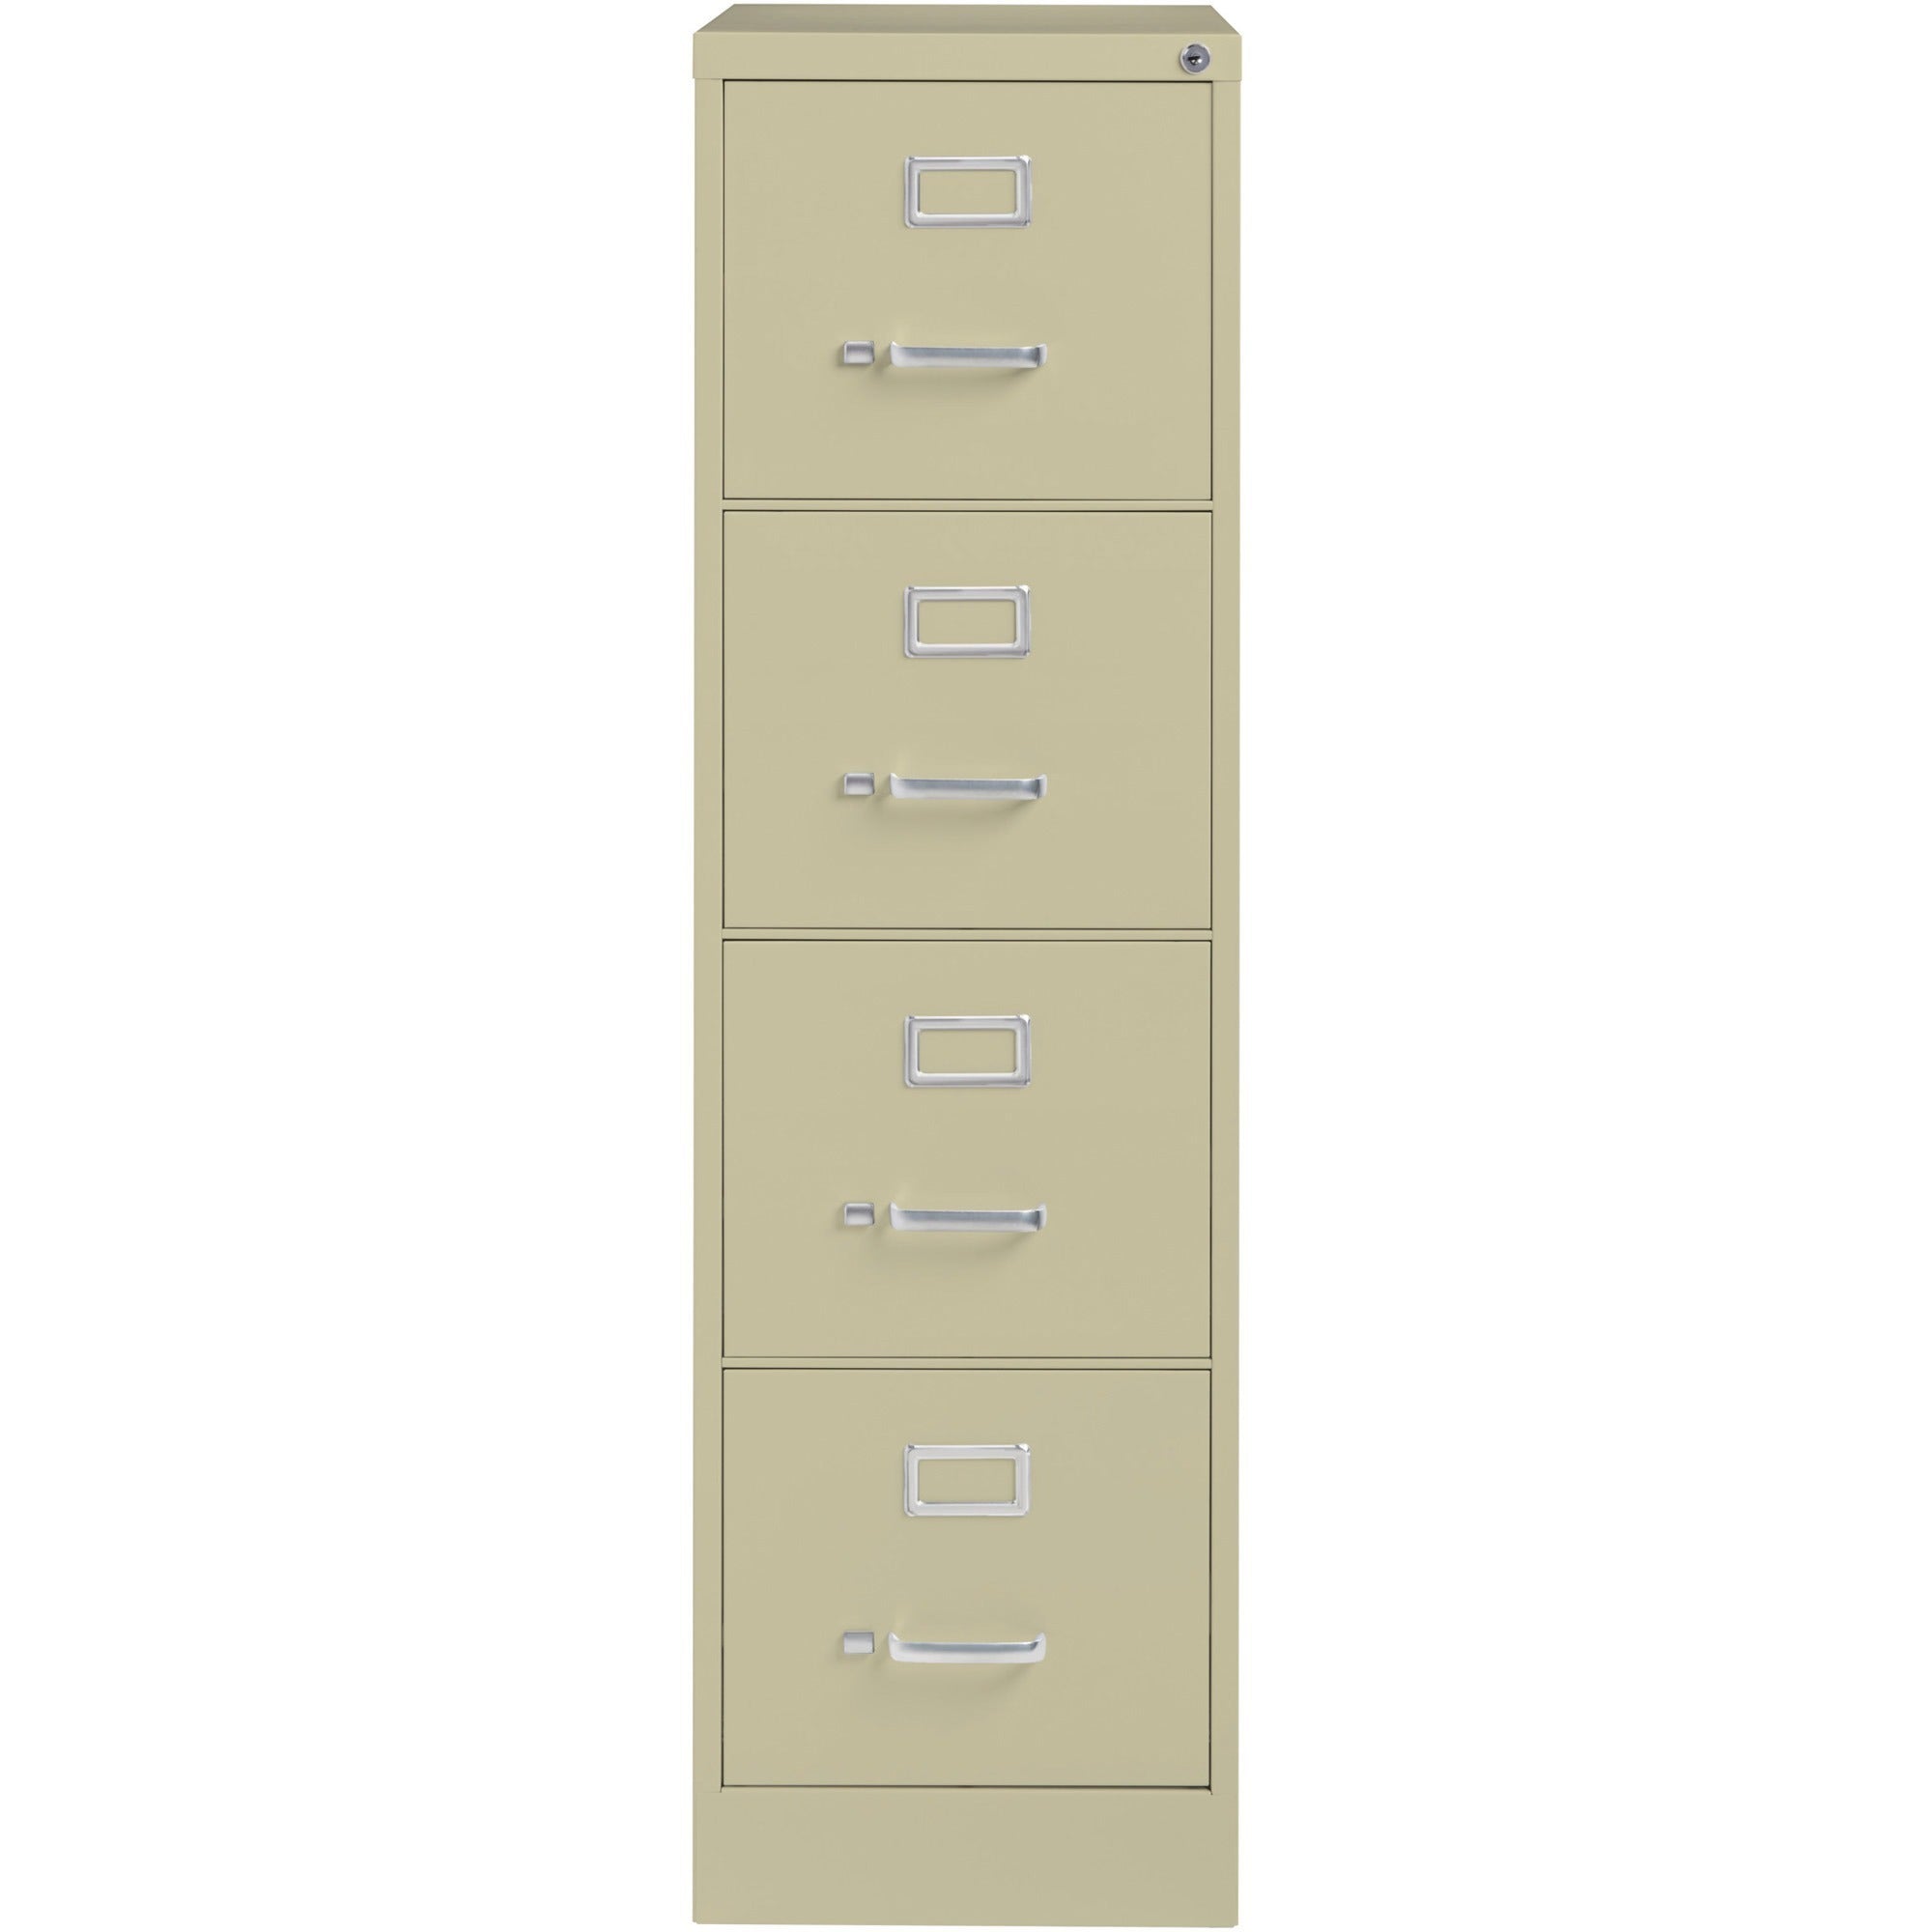 Lorell Fortress Series 26-1/2" Commercial-Grade Vertical File Cabinet - 15" x 26.5" x 52" - 4 x Drawer(s) for File - Letter - Vertical - Security Lock, Ball-bearing Suspension, Heavy Duty - Putty - Steel - Recycled - 